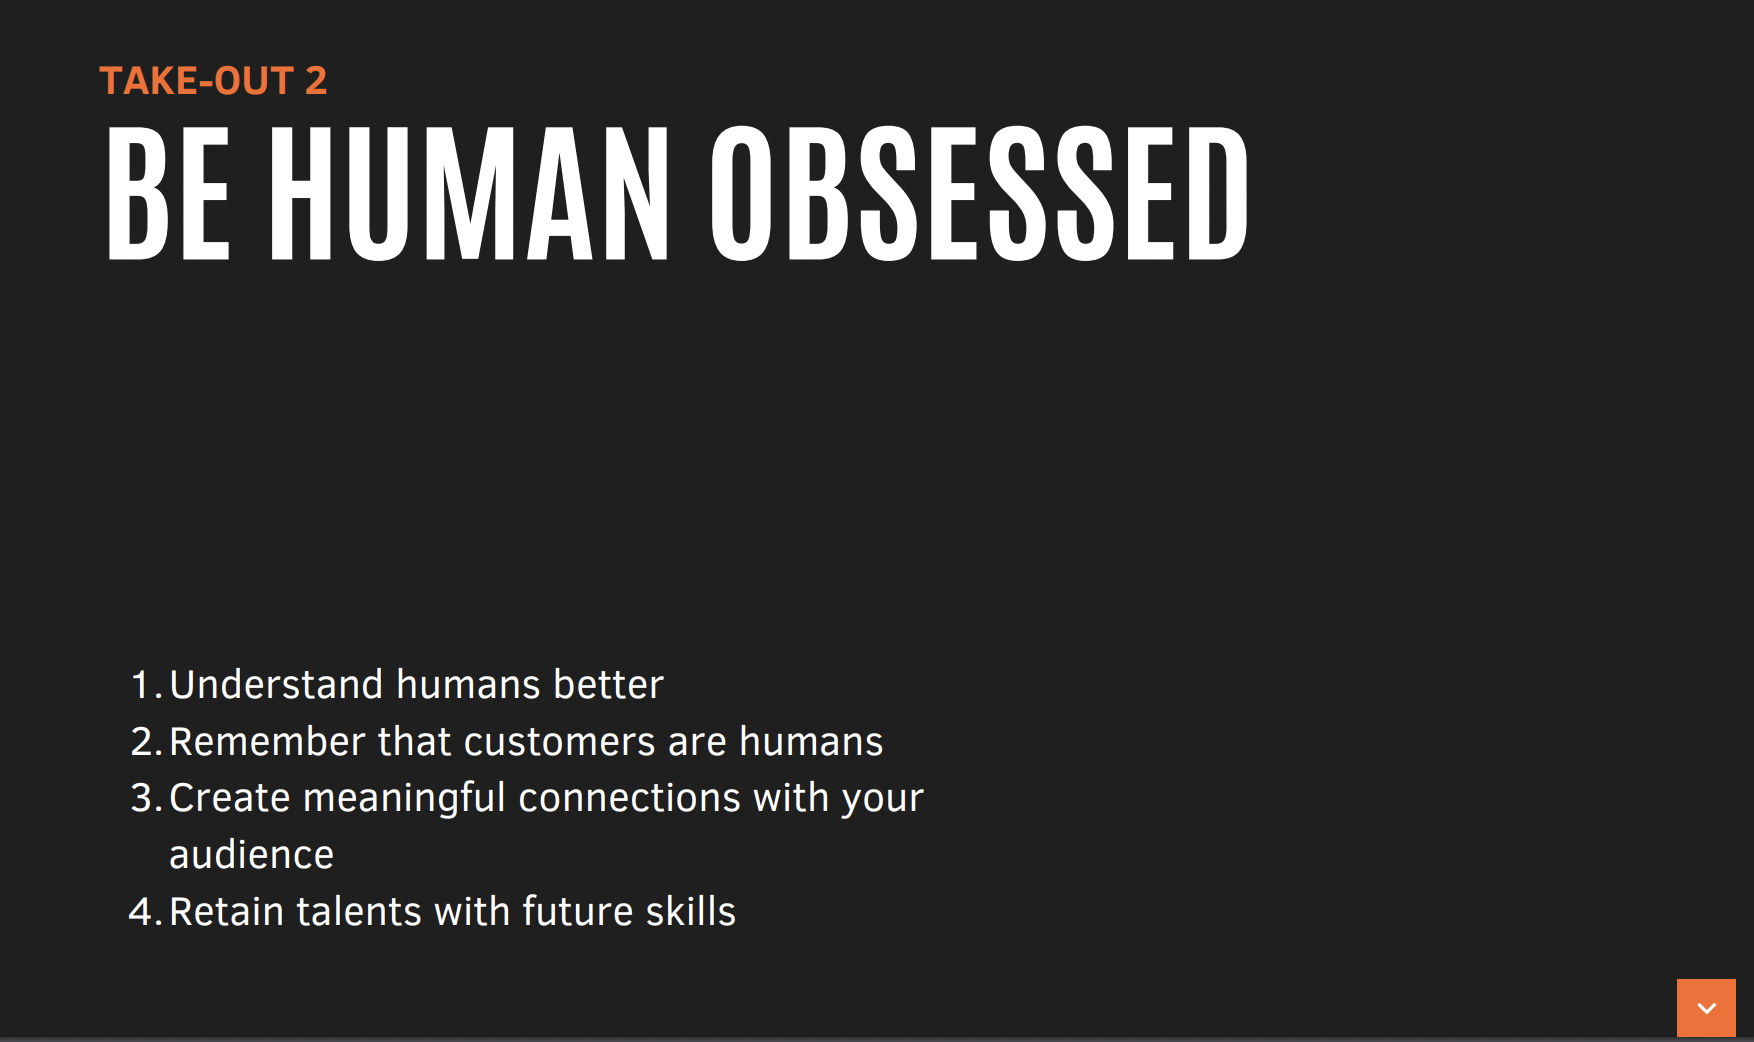 Be human obsessed